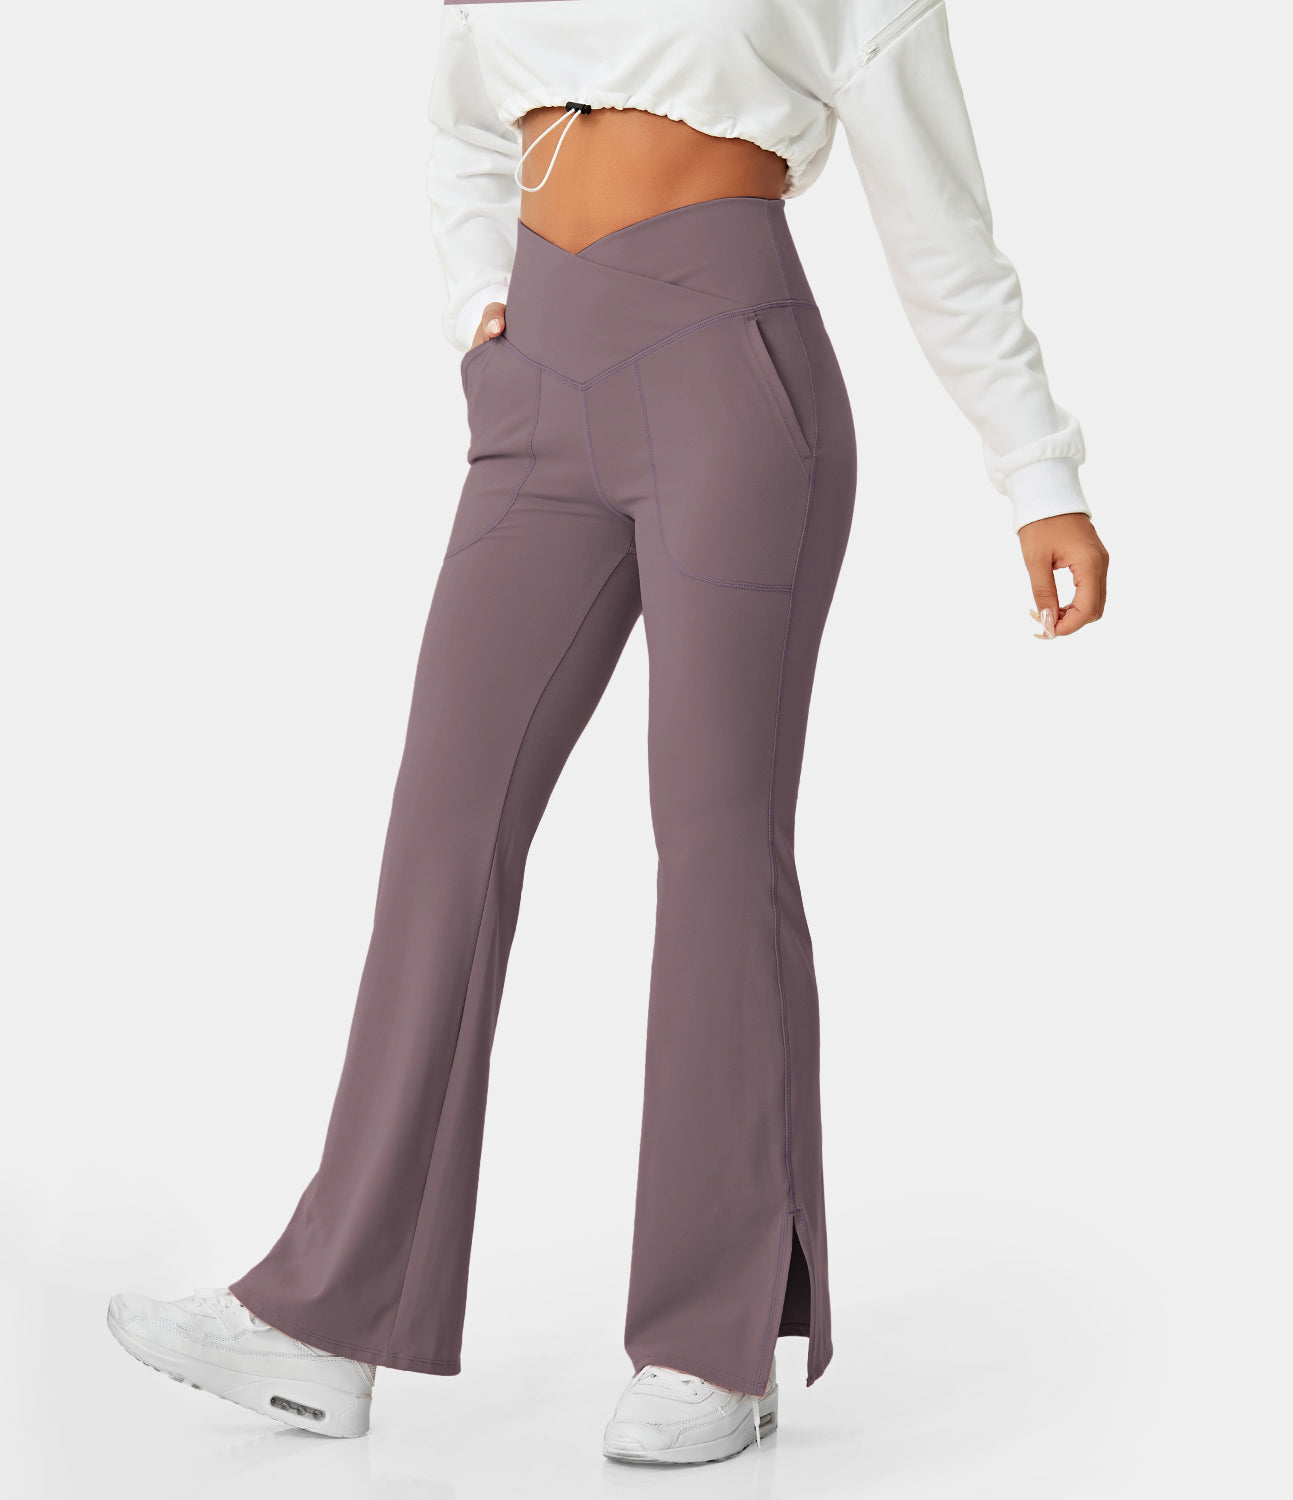 Flex Crossover High-Rise Flare Pants  Flare pants, Flares, High rise pants